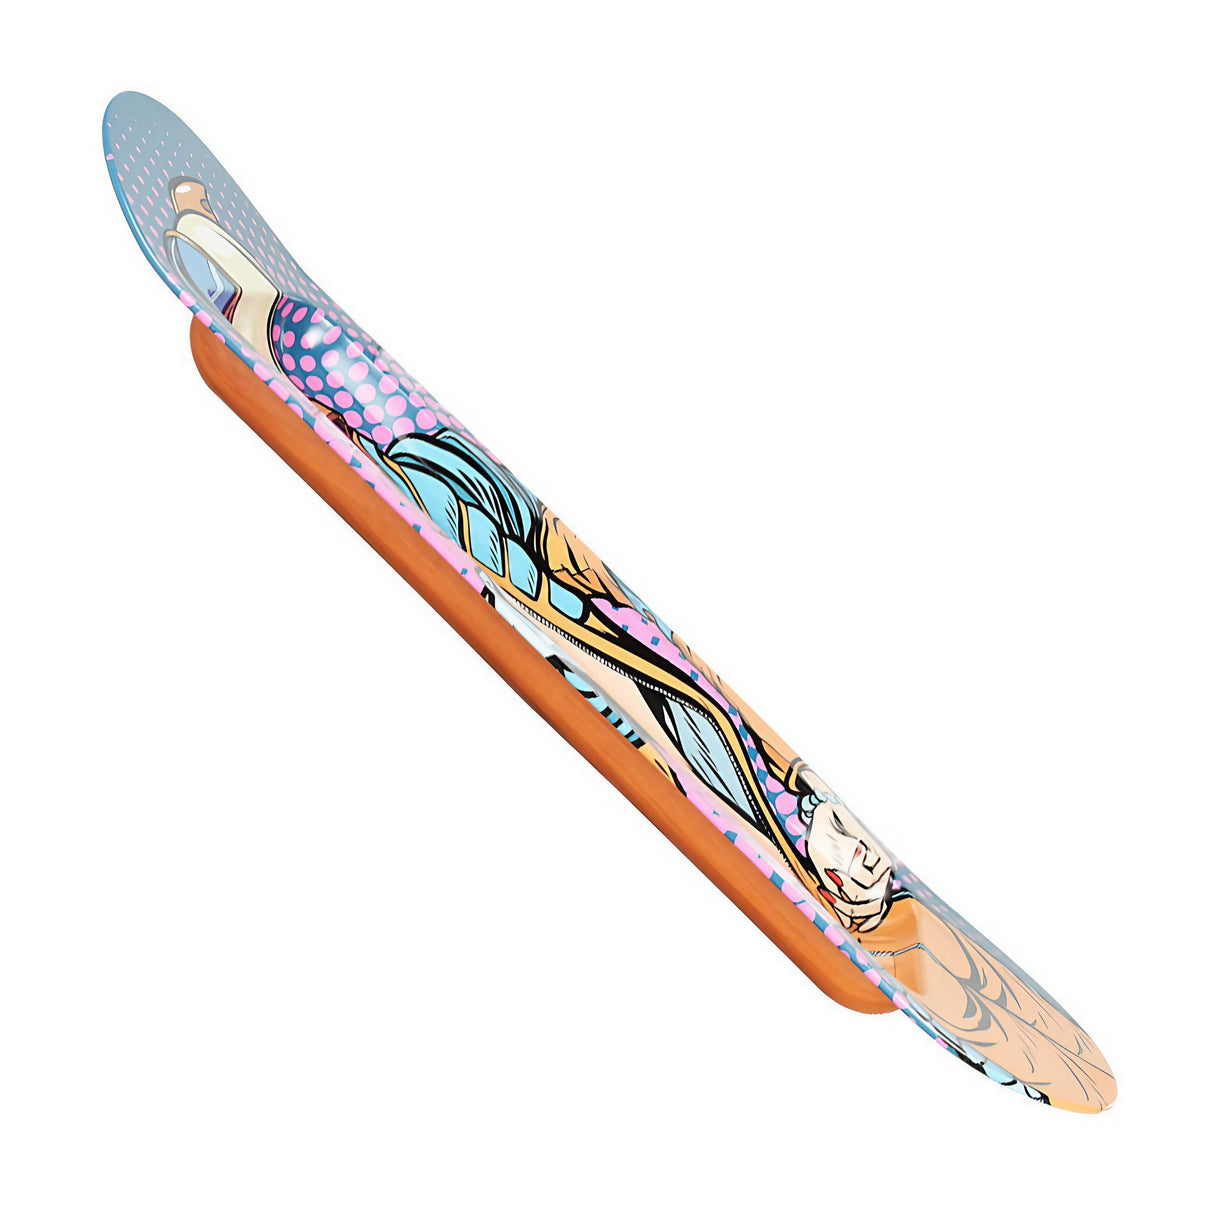 Pulsar SK8Tray Metal Rolling Tray with Vibrant 3D Zero-G Strip Design, 7.25"x19.75", Angled View